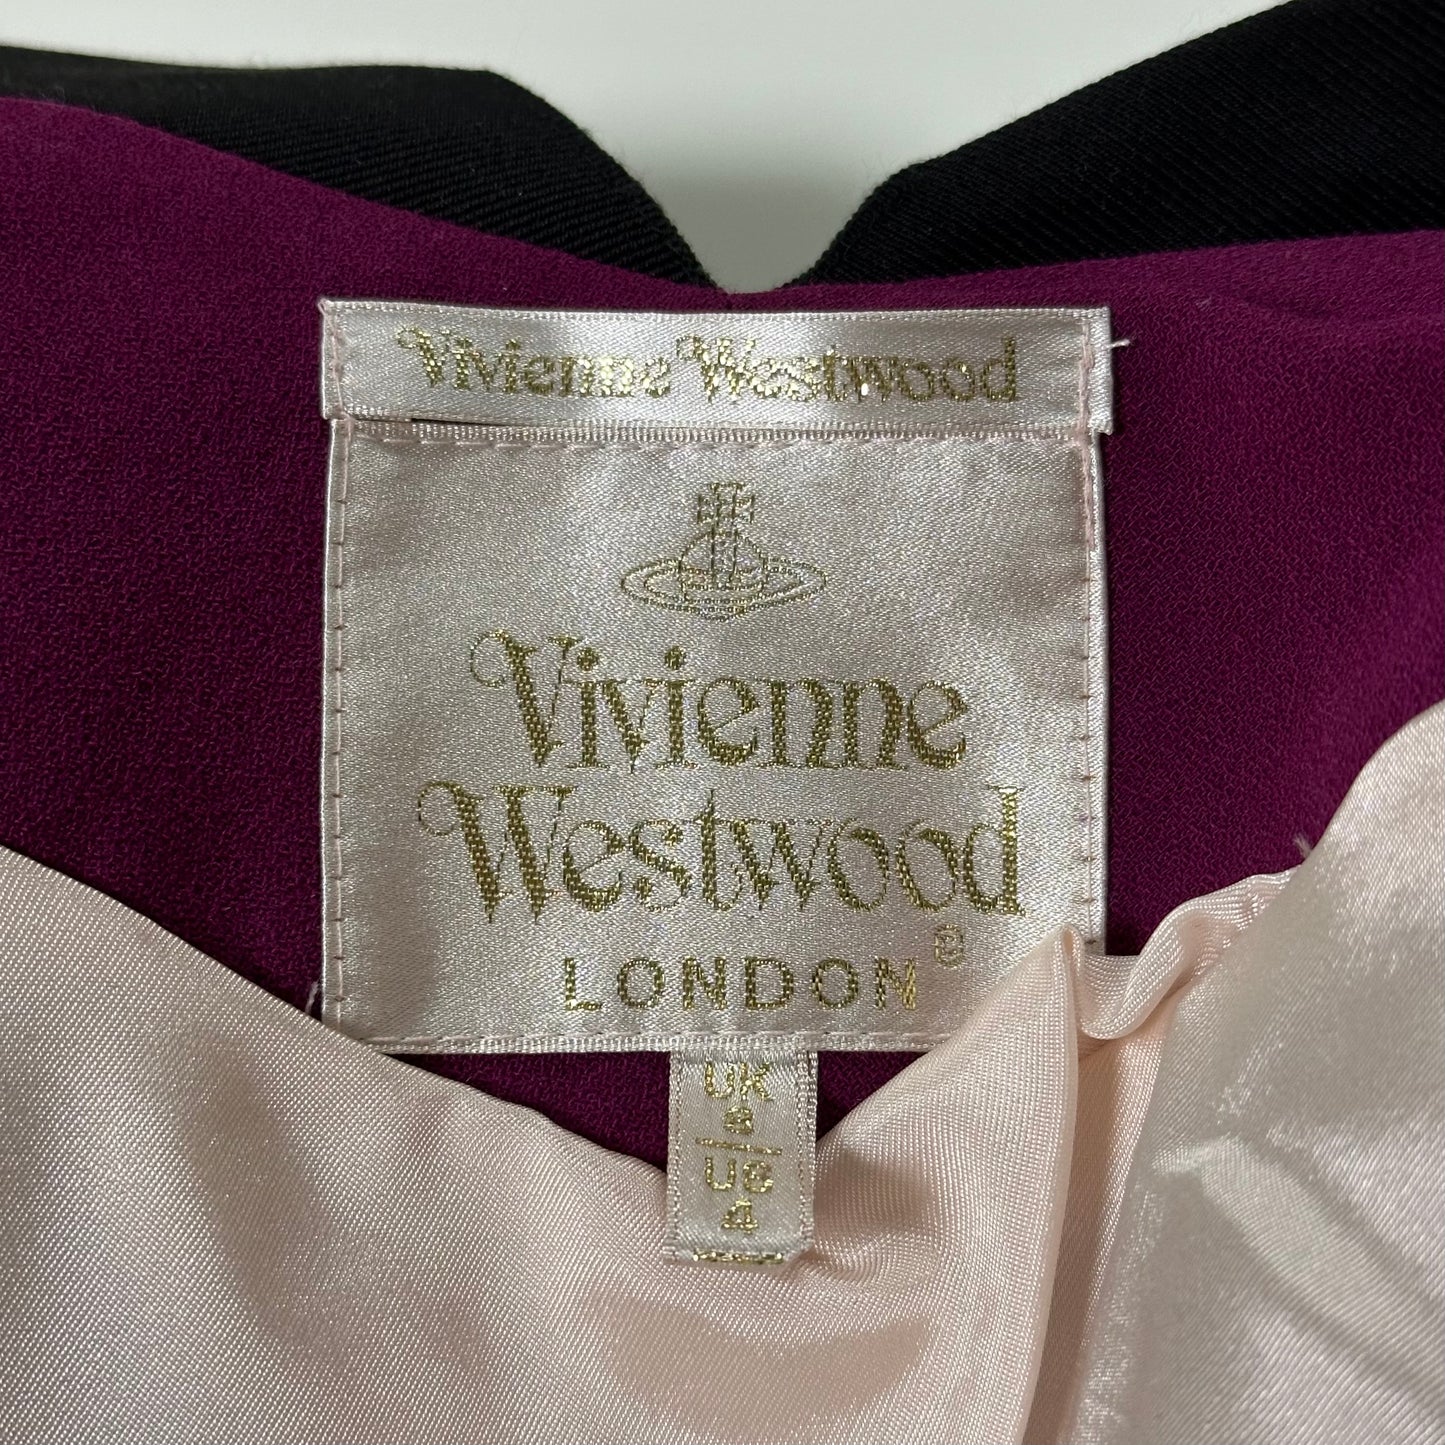 VIVIENNE WESTWOOD Fall Winter 1998 Cropped Jacket with Orb Buttons